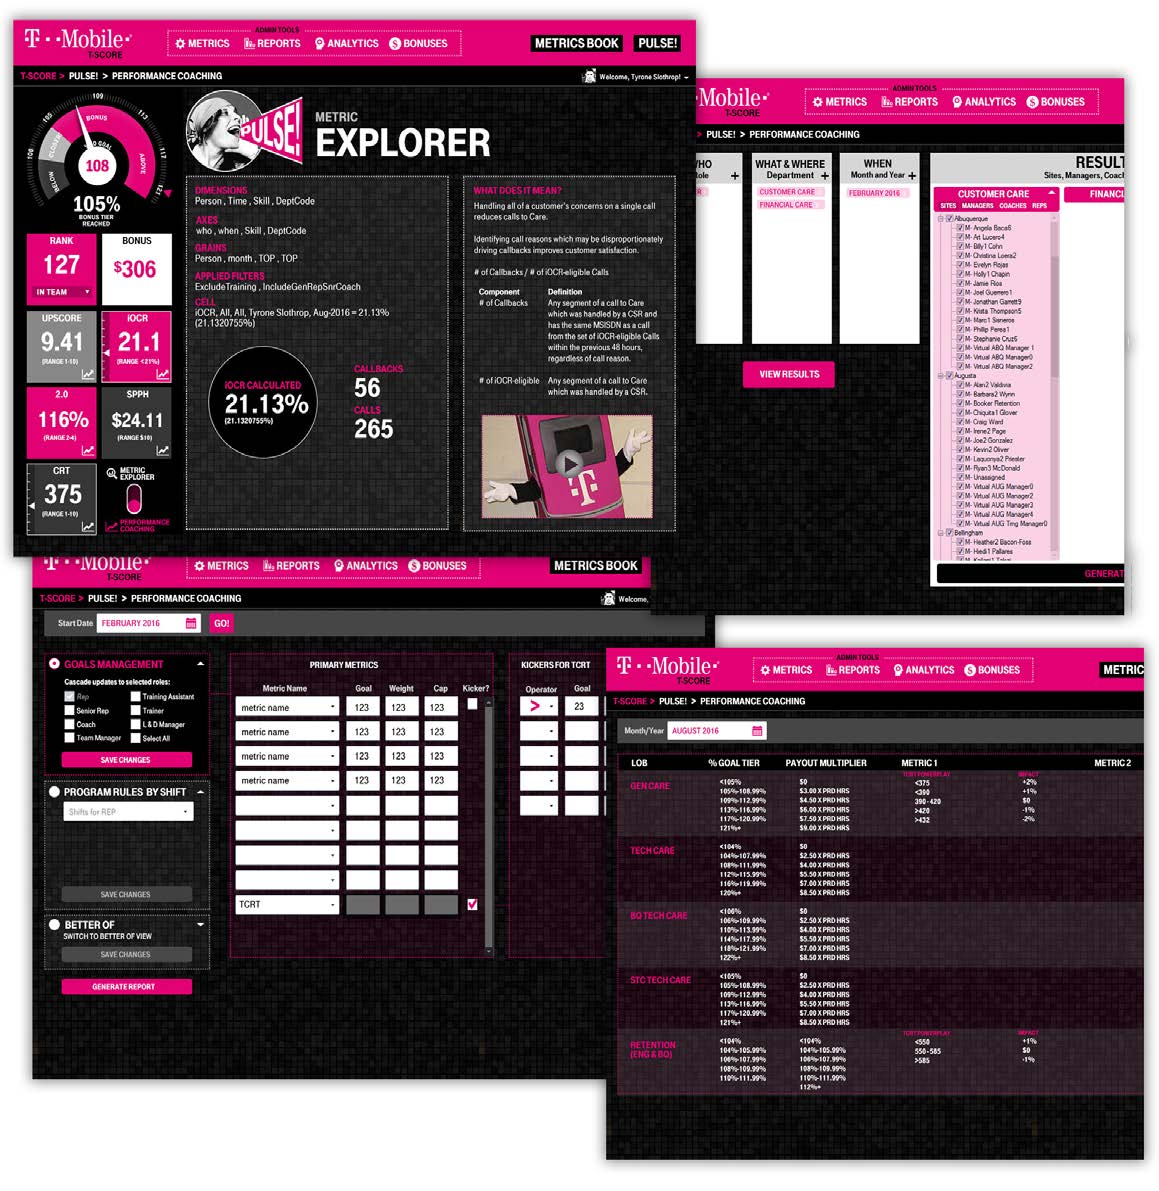 t-mobile INTERNAL SALES APPLICATION Design + Implementation 2016-2020 I was brought onboard by T-Mobile in 2016 as a Senior UX Software Engineer to work on their internal sales applications, used by thousands of management and executive level users for business intelligence. I determined with leadership the user needs on all levels of access, designing a UI that made the app serve both current and predicted forms of data. Then my team and I implemented an MVC UI using Angular. I conceptualized a scalable platform to by reused every time a new internal app was needed. Our team was the first to adopt Agile Scrum methodology, which became the template for the entire department. I assisted data analysts in maintaining and upgrading the application until we sunsetted it in 2020. (Screenshots used with permission)